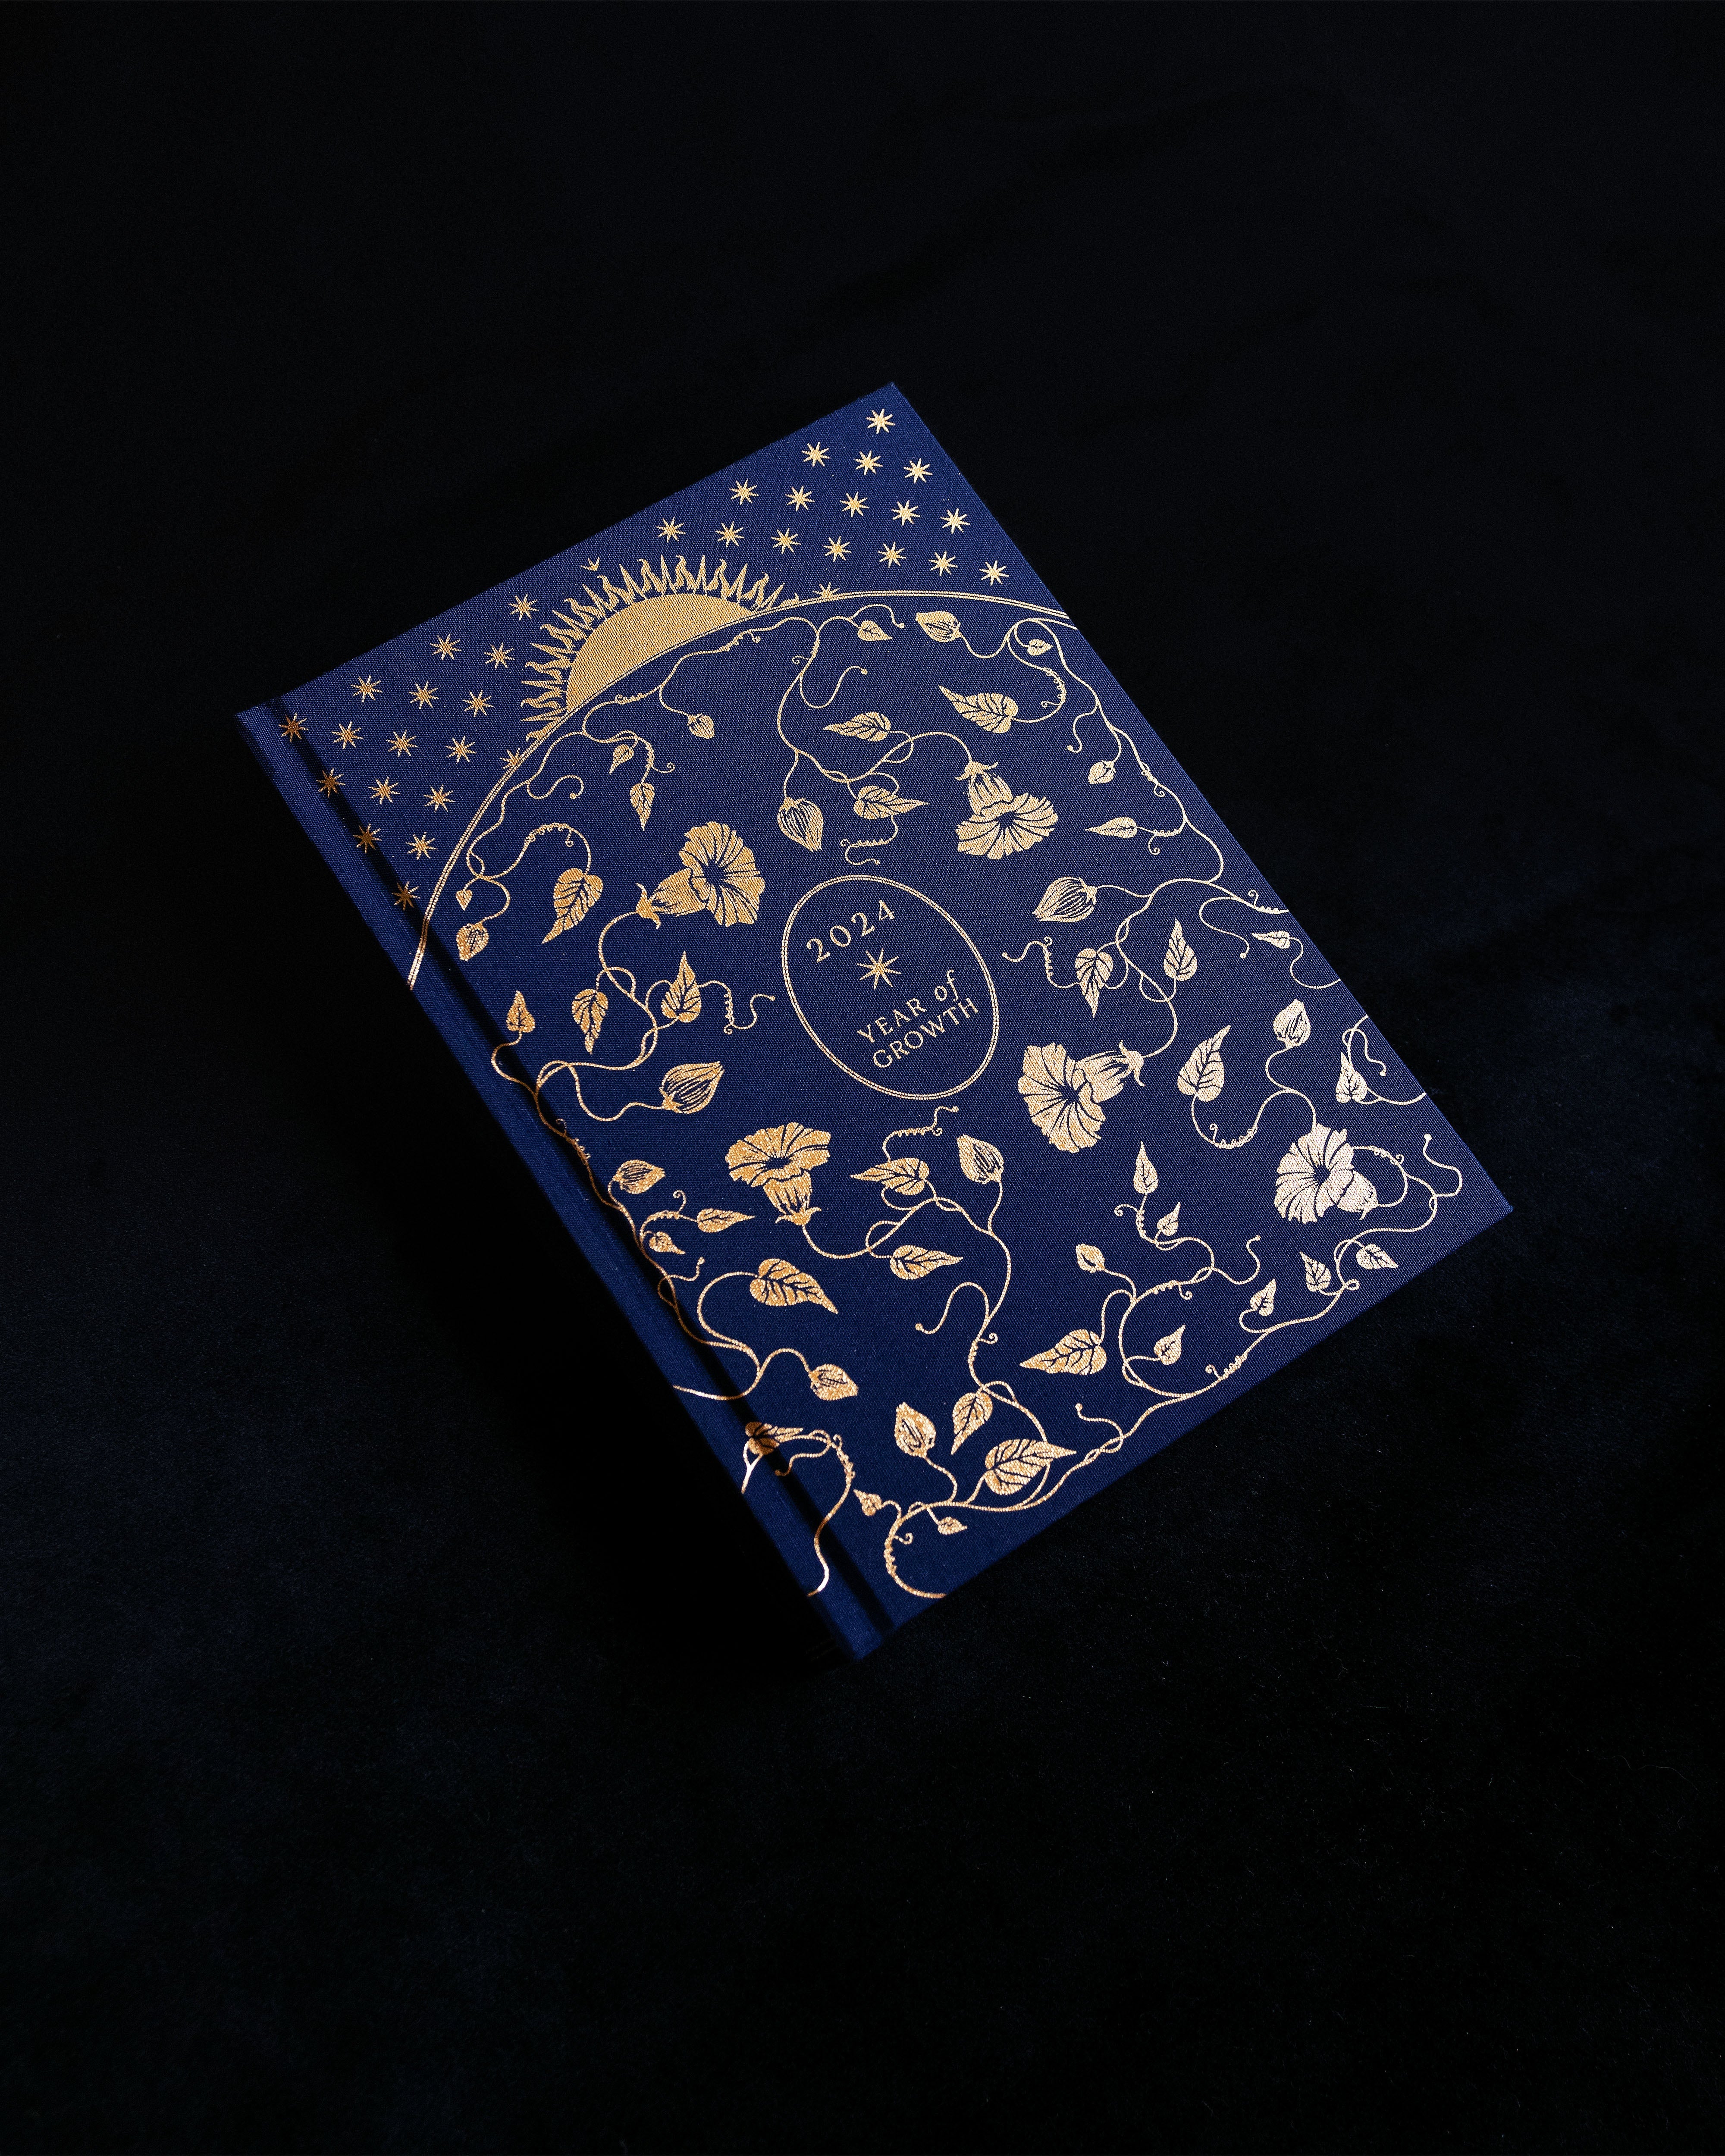 DREAMY MOONS 2024 YEAR OF GROWTH BOOK - SAGE